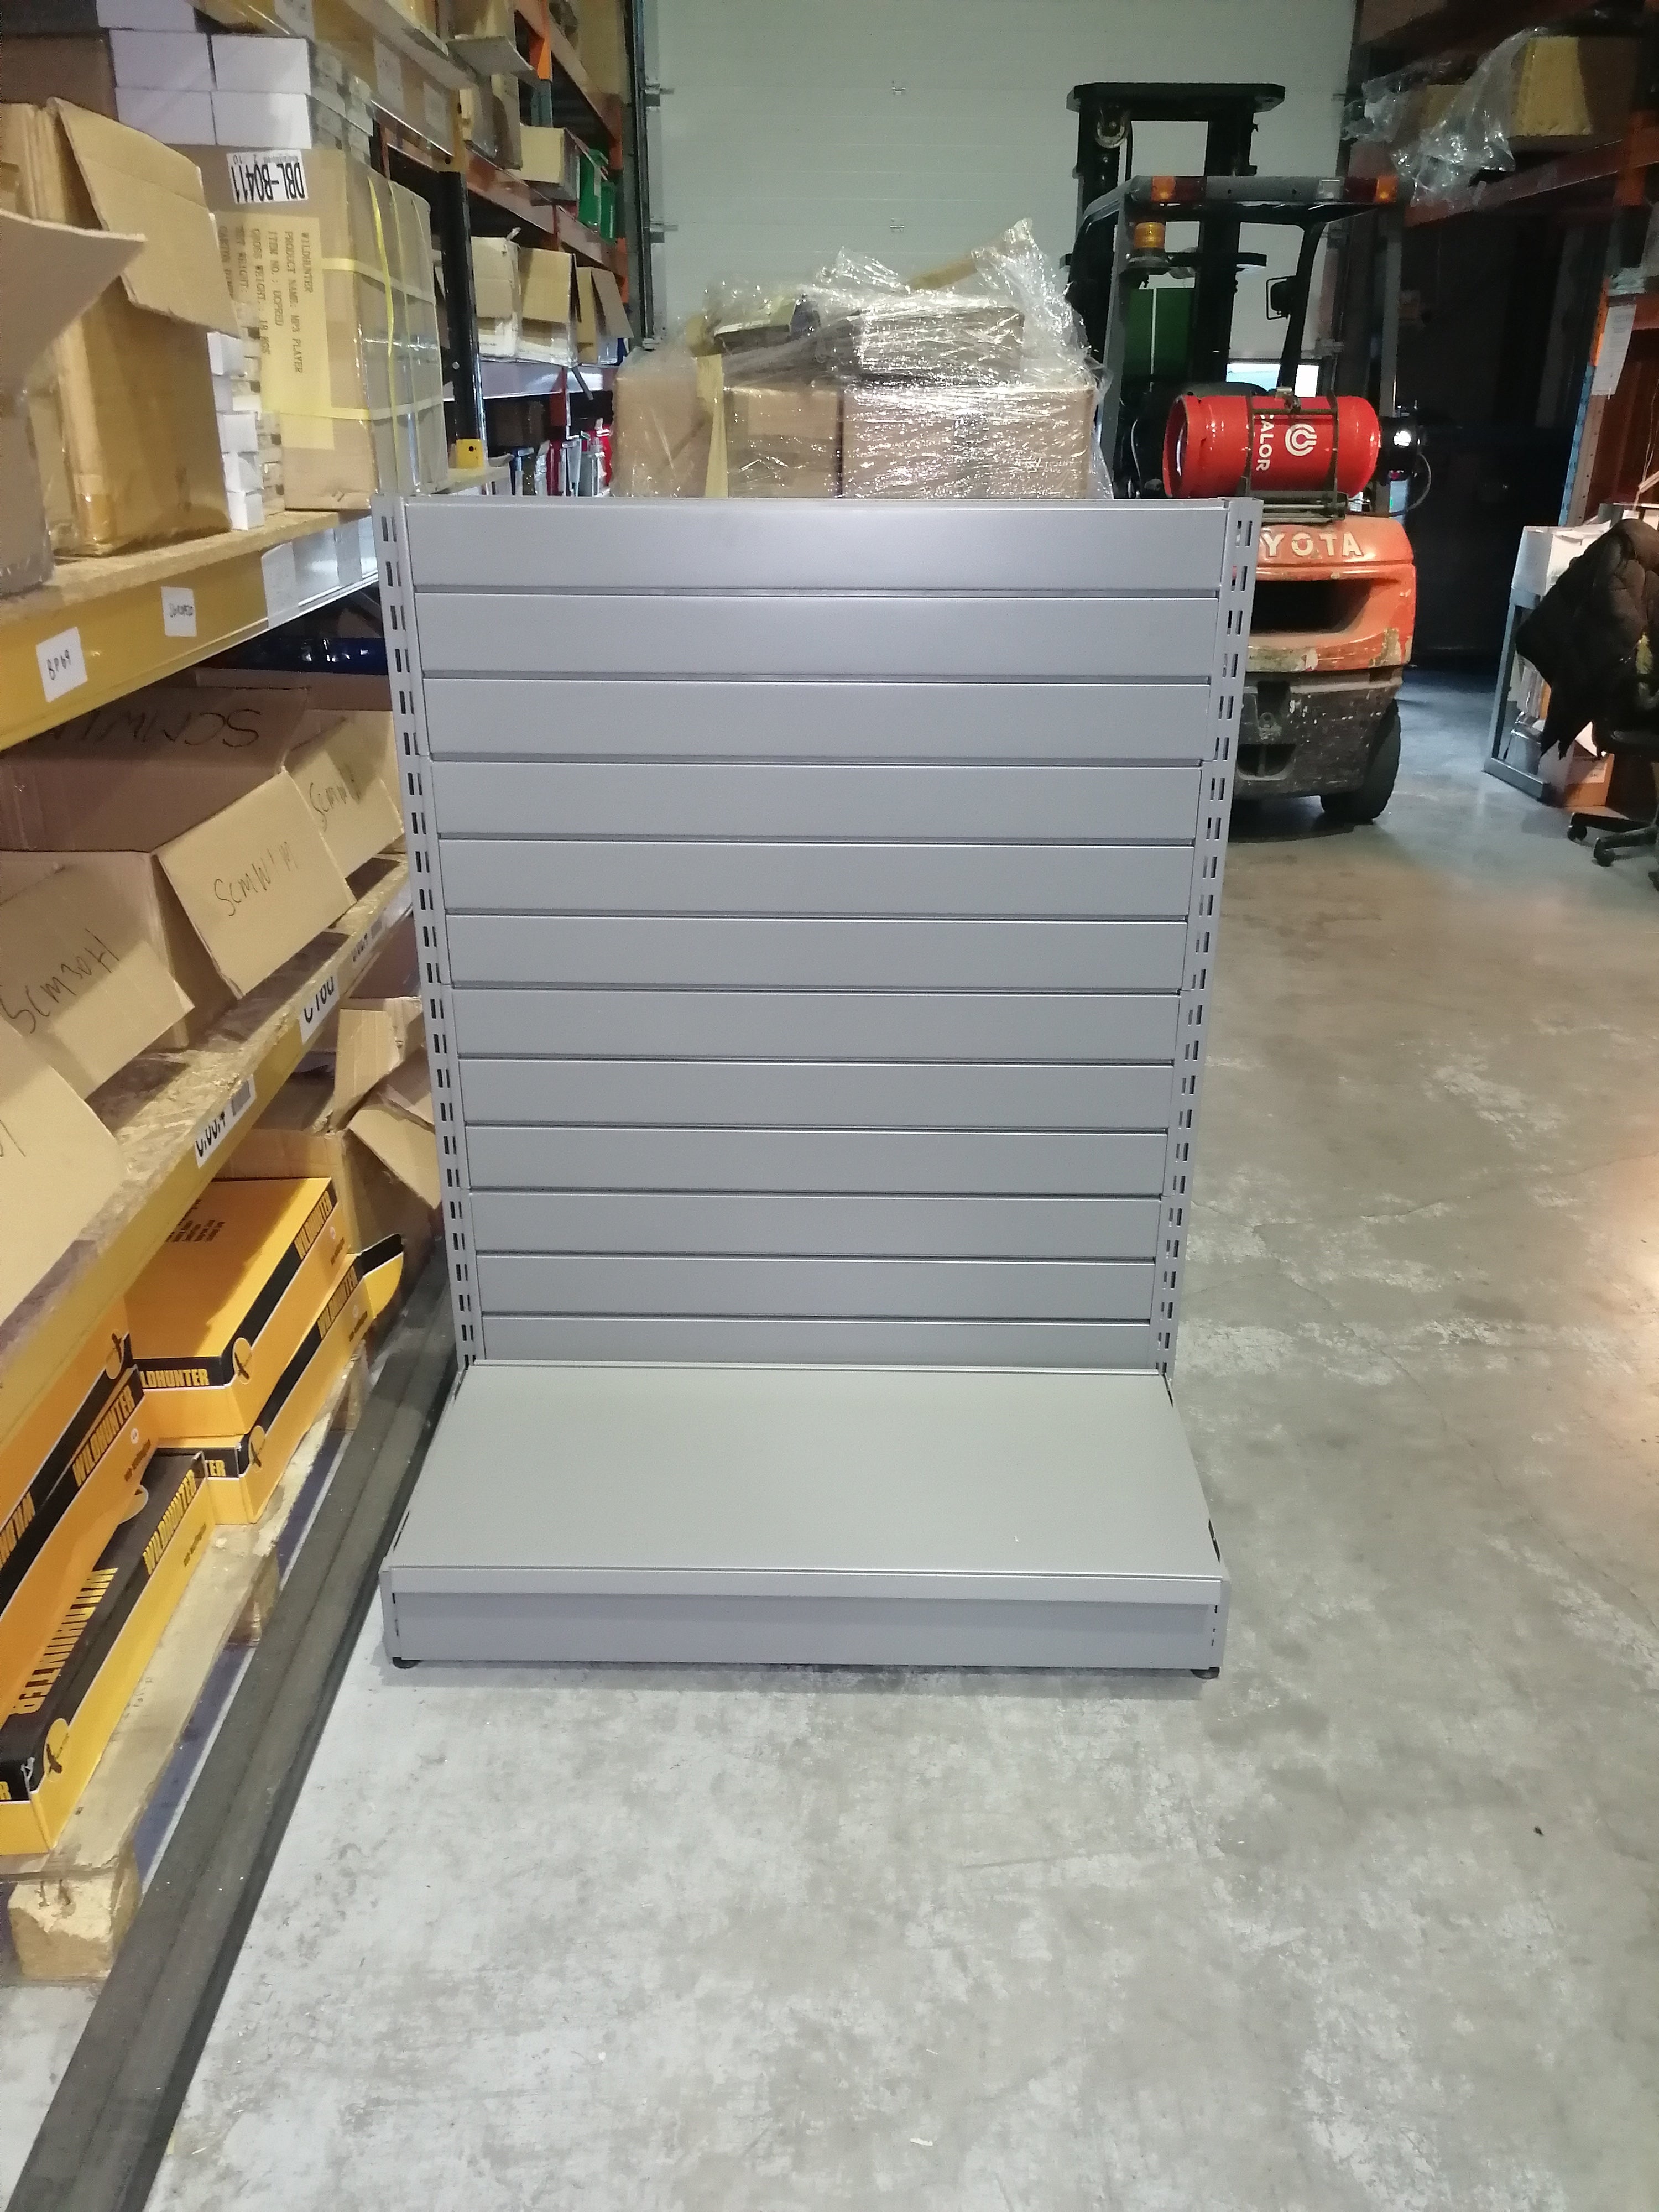 Double Sided grey shop shelving , 1350mm high. With slatwall